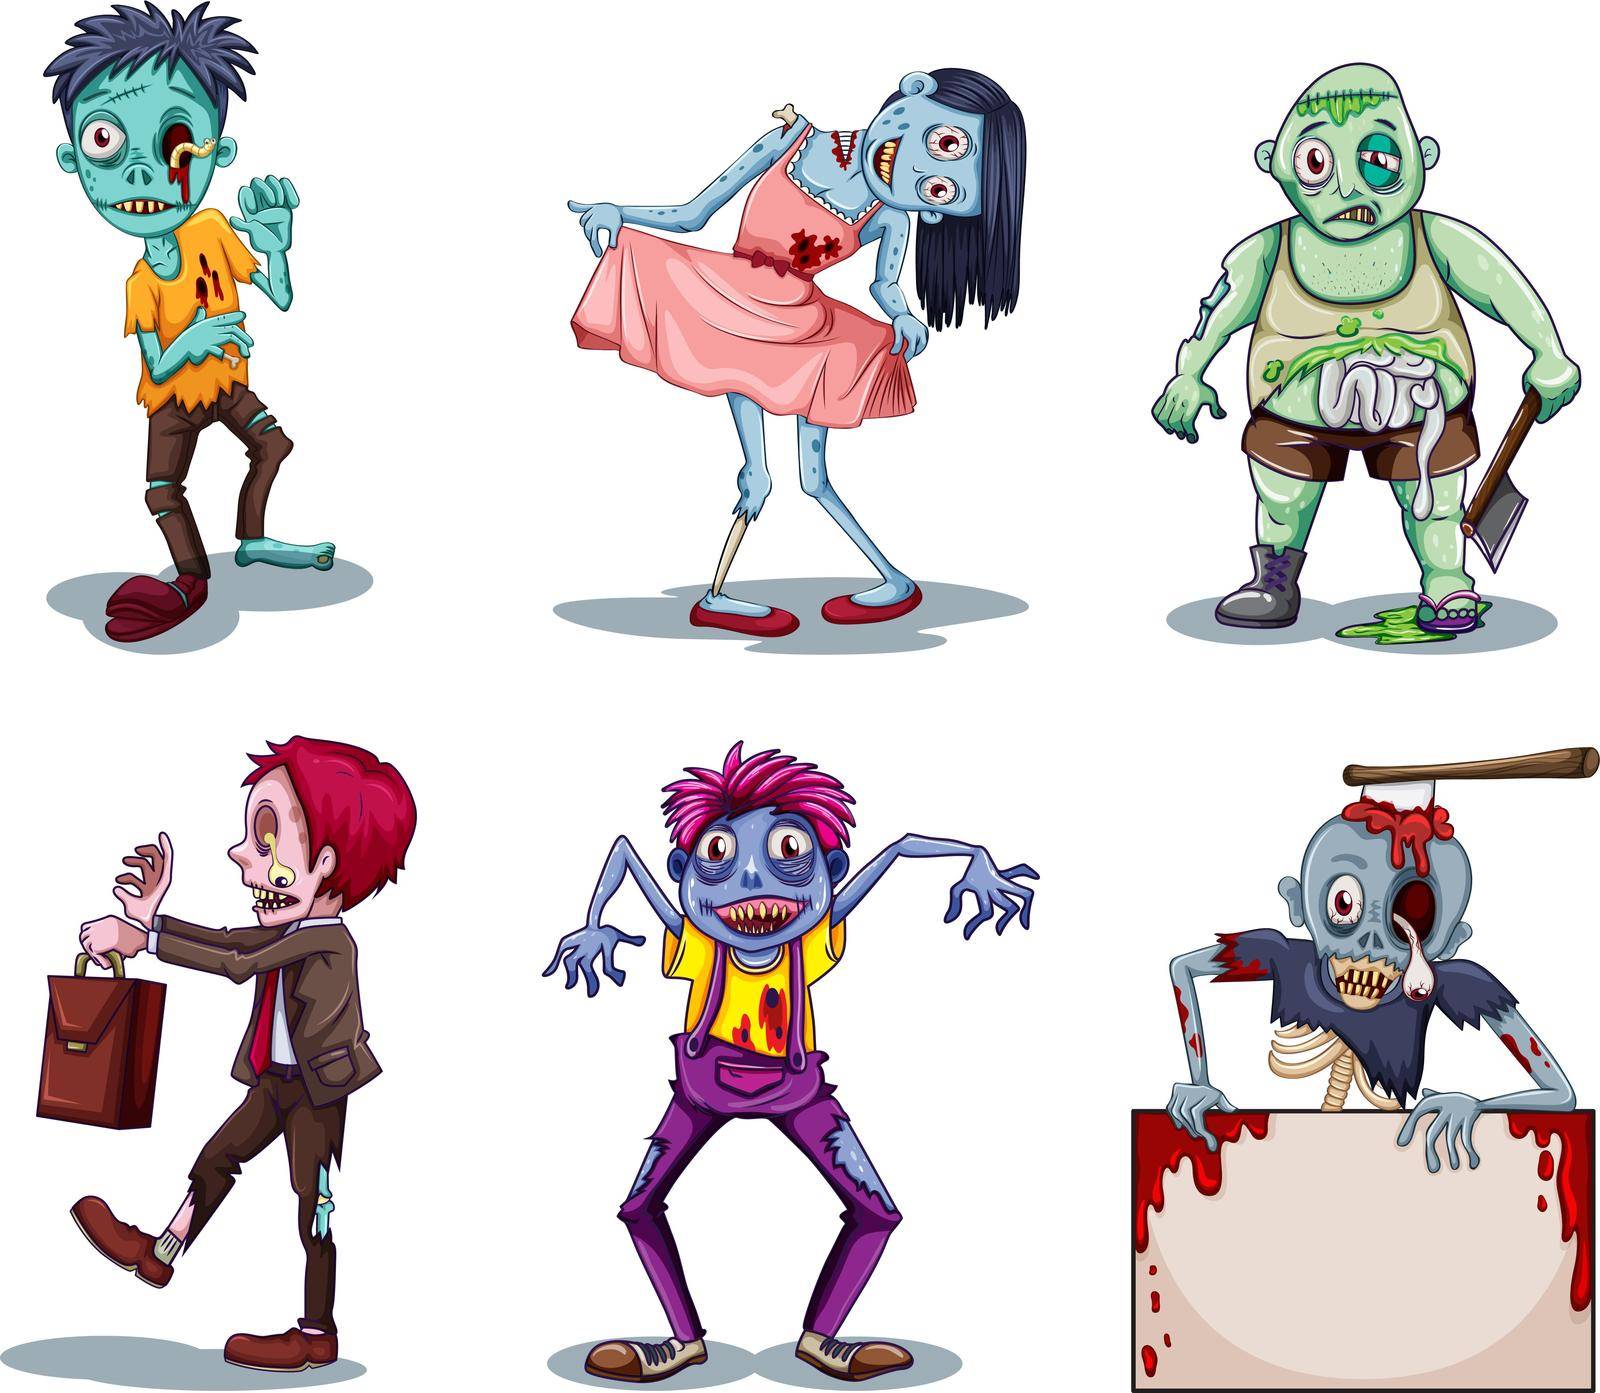 Scary zombies by iimages